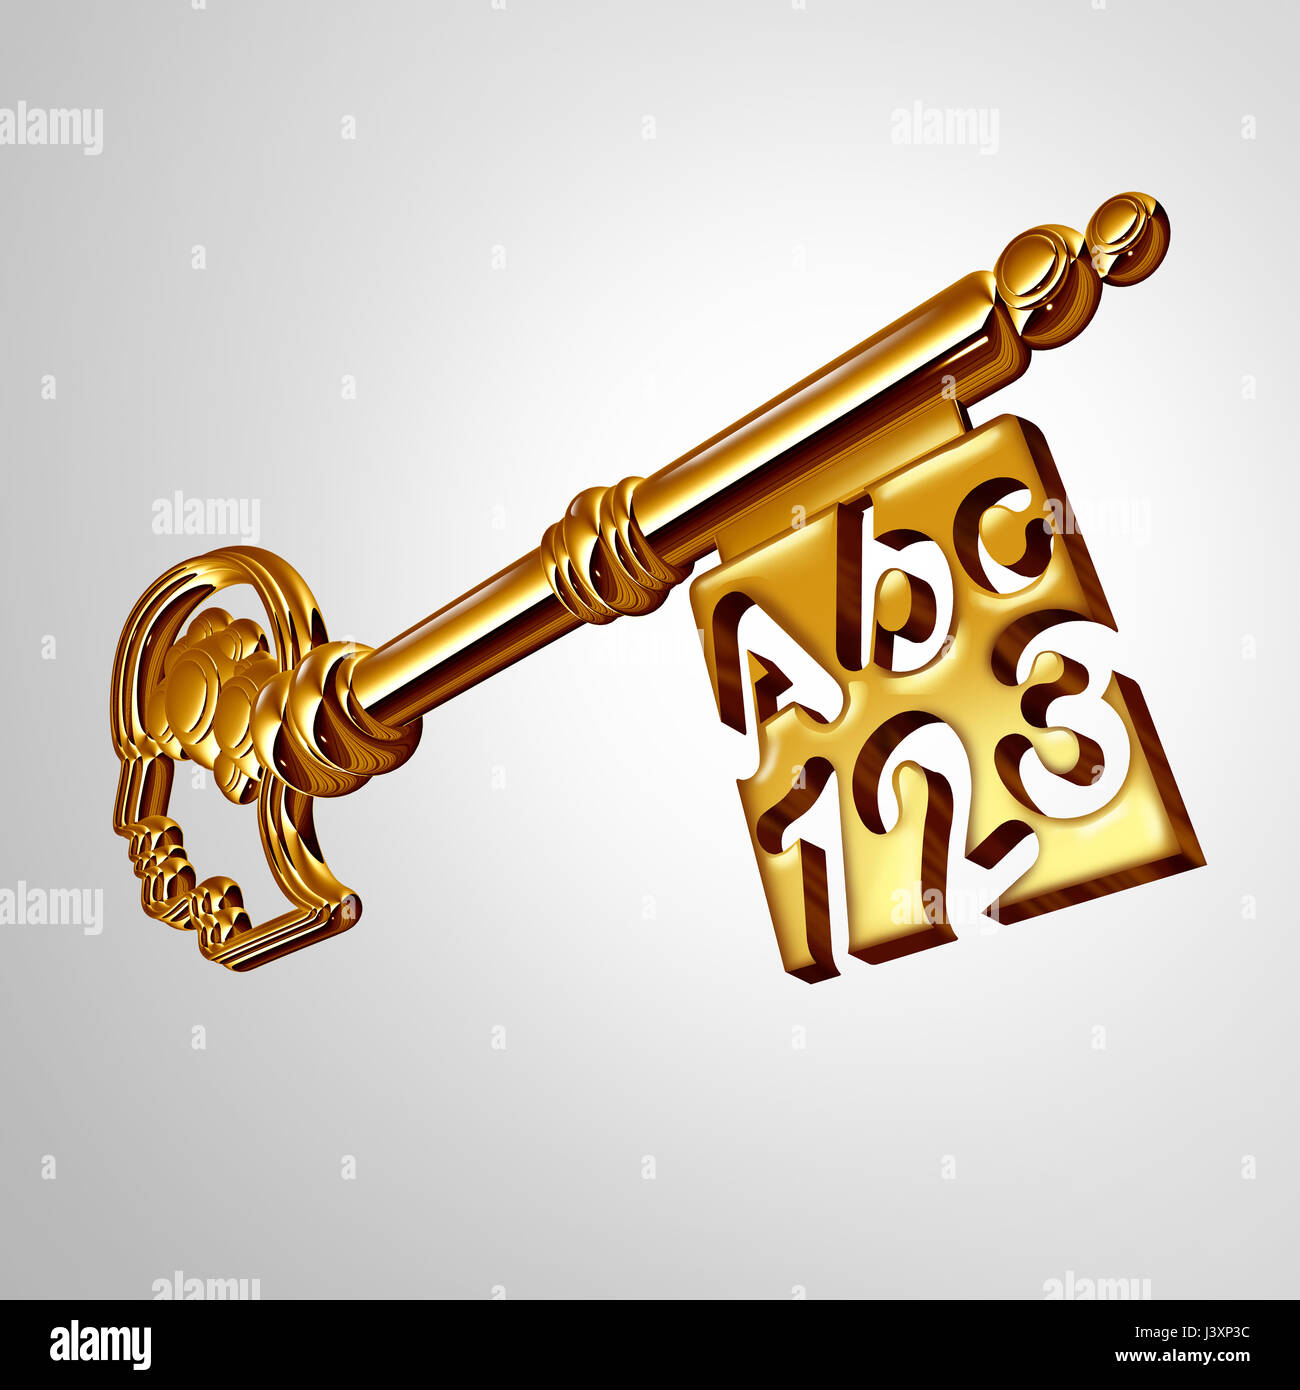 Education key to success symbol representing school learning or teaching students metaphor as a reading and math training tool to open. Stock Photo